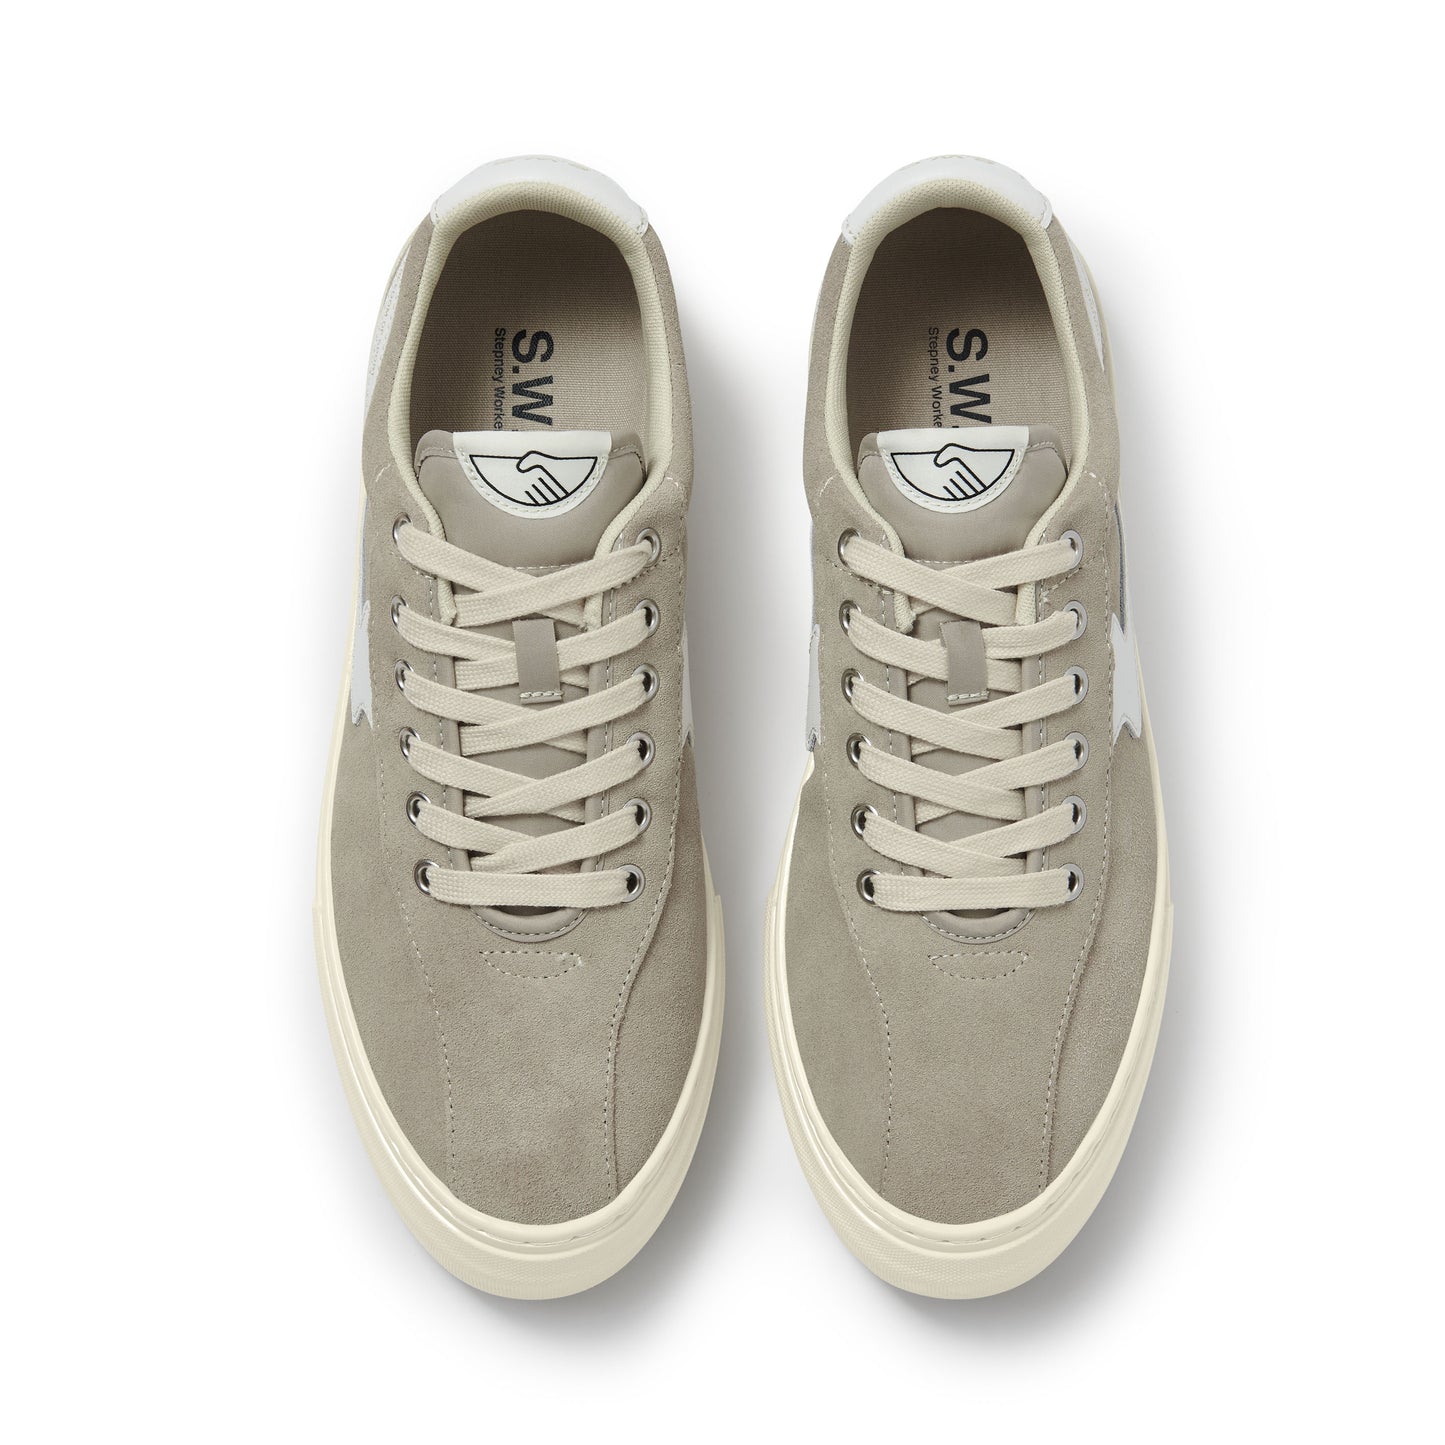 DELLOW S-STRIKE CUP SUEDE LIGHT GREY-WHITE